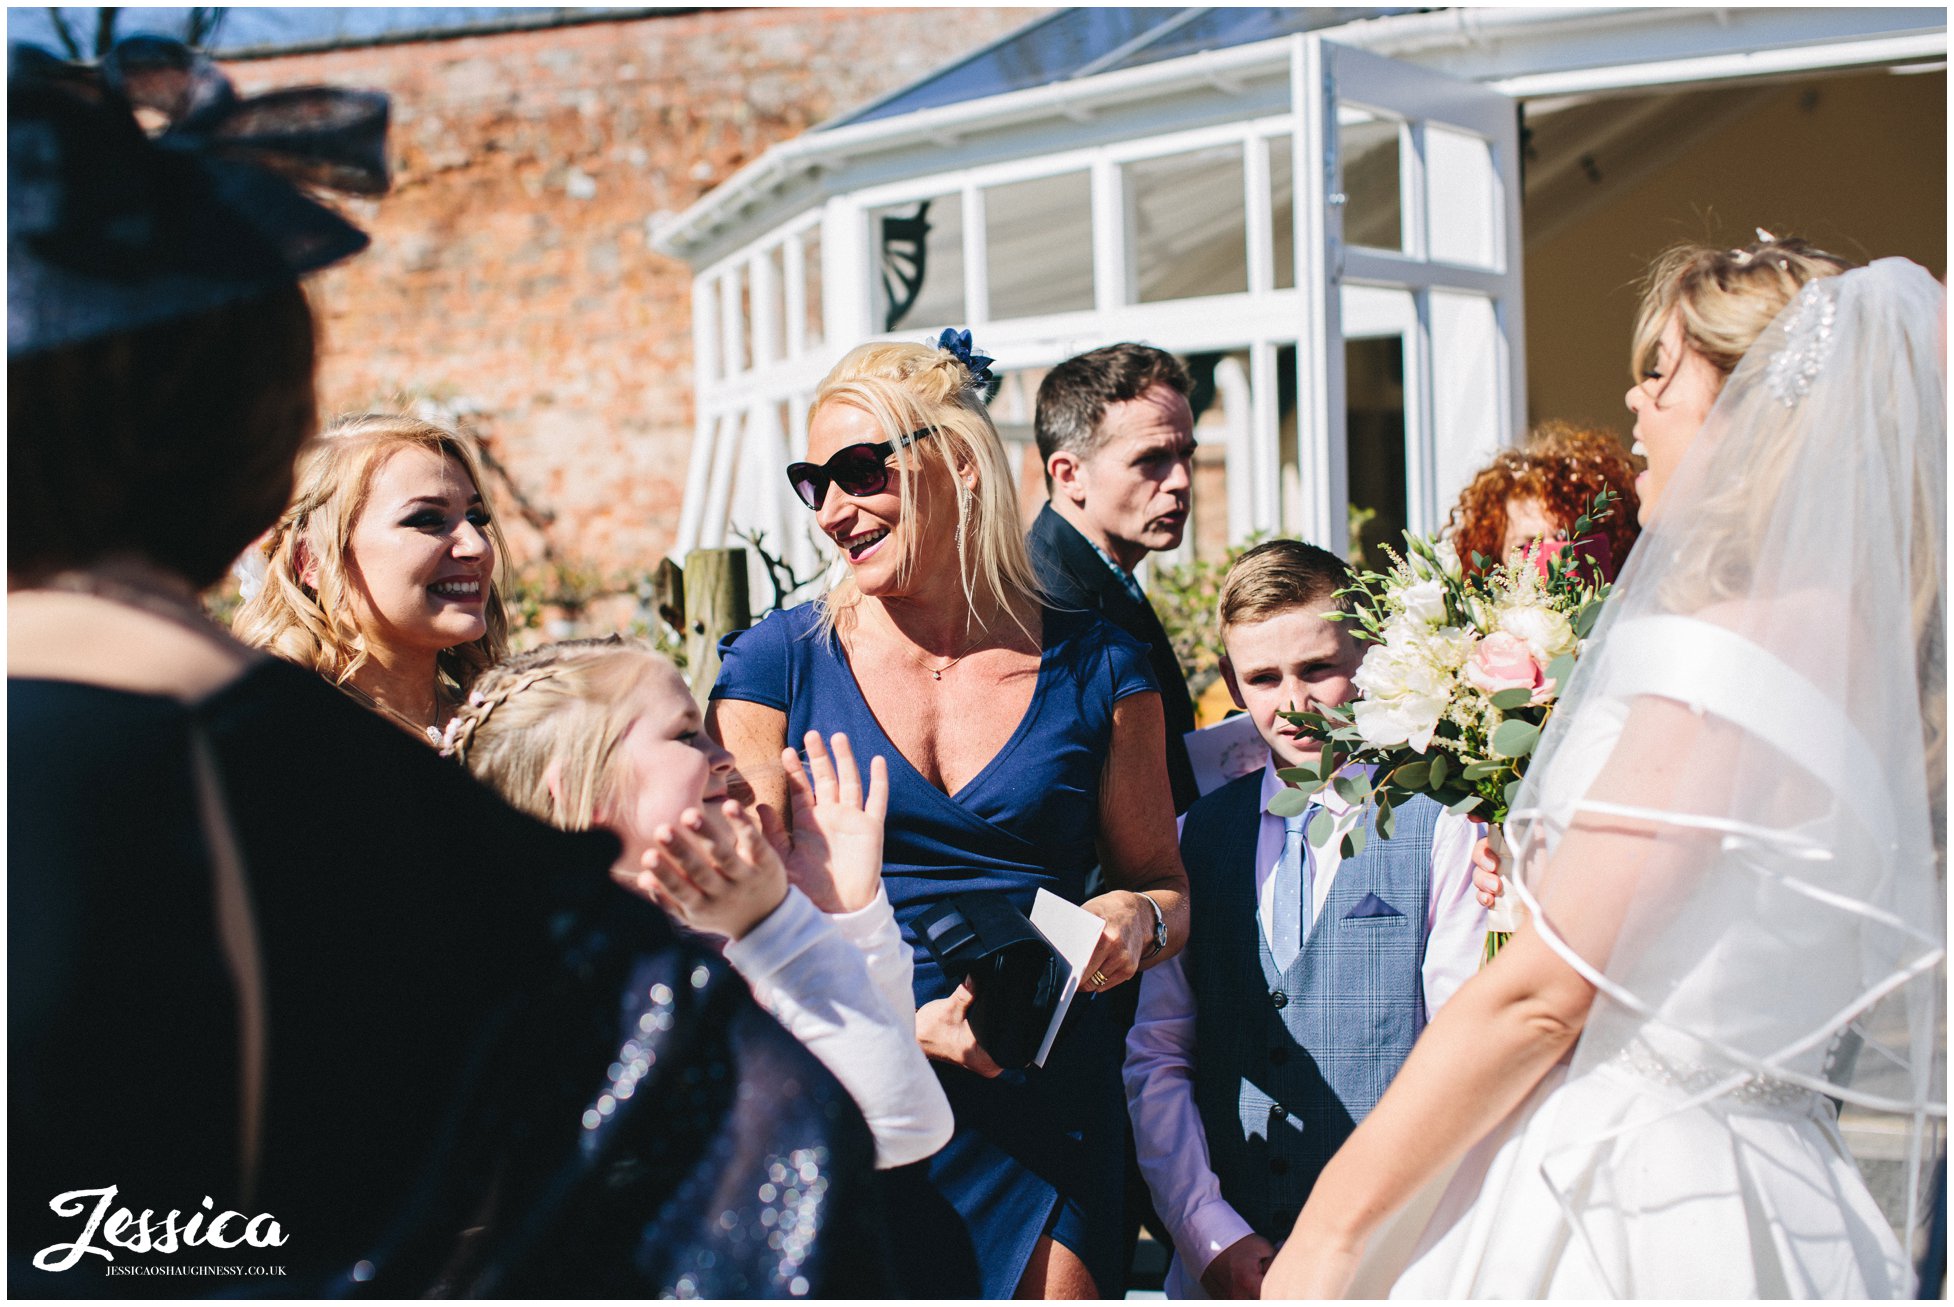 guests congratulate bride after the ceremony in shropshire